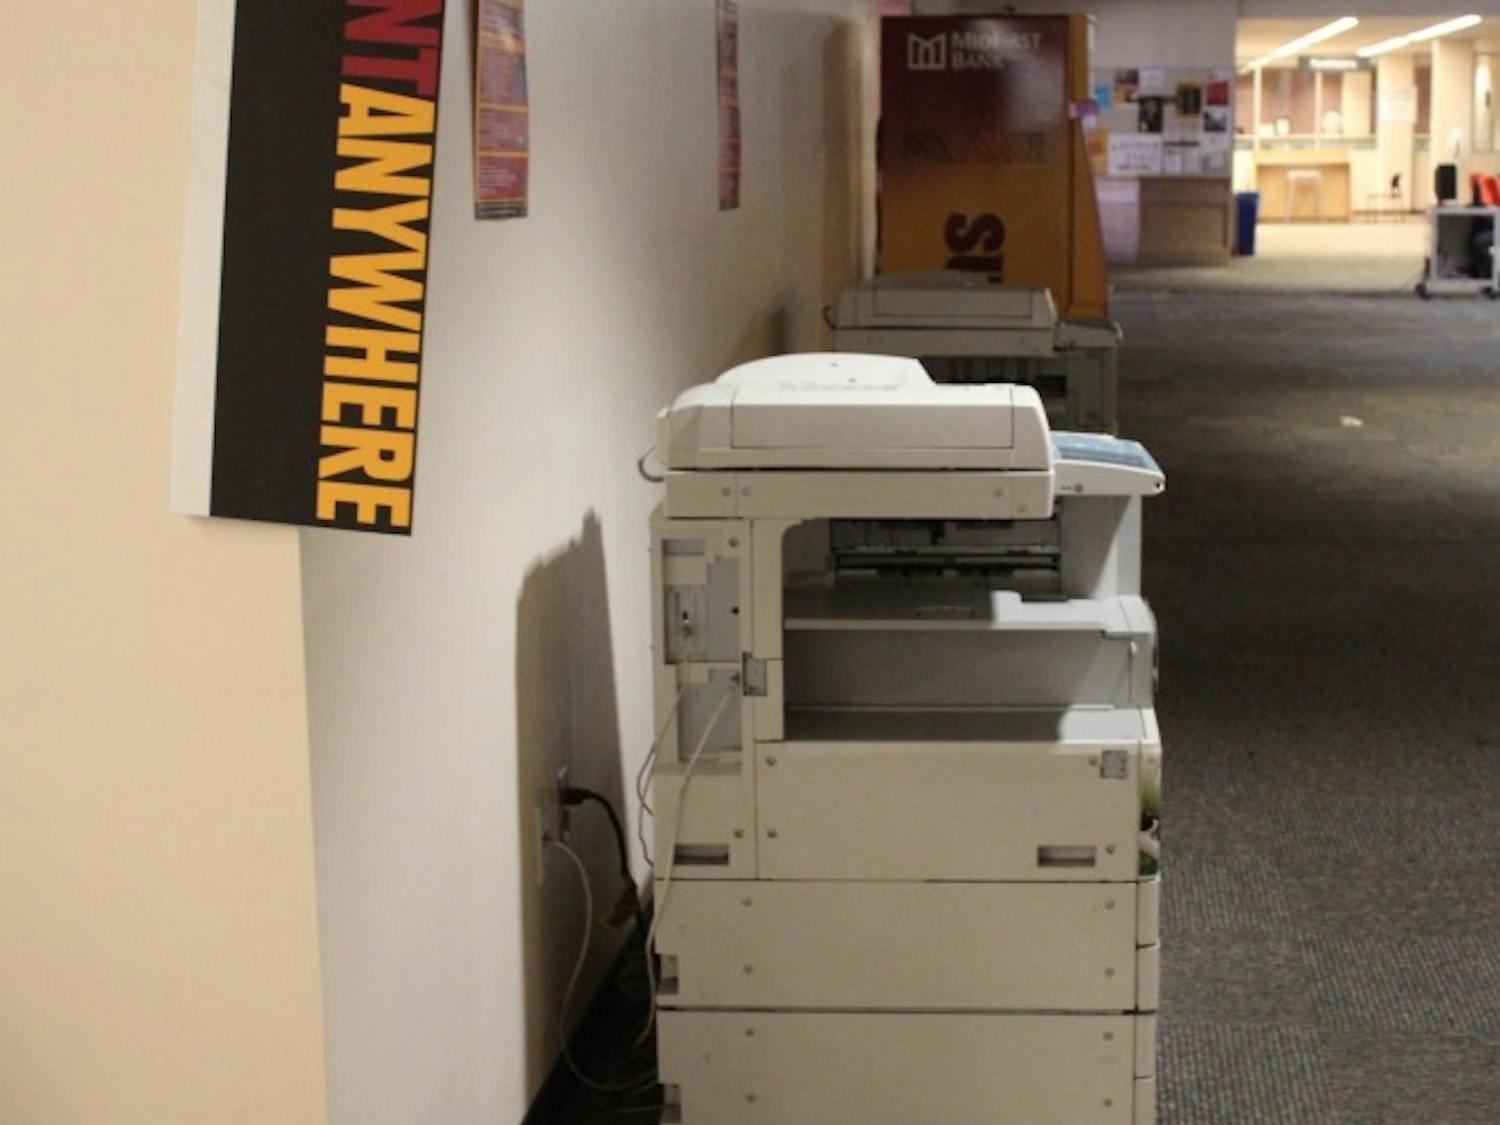 “Print Anywhere” signs are displayed at the Hayden Library in Tempe. Students are now allowed to print before putting money on their student accounts. (Kat Simonovic/The State Press)